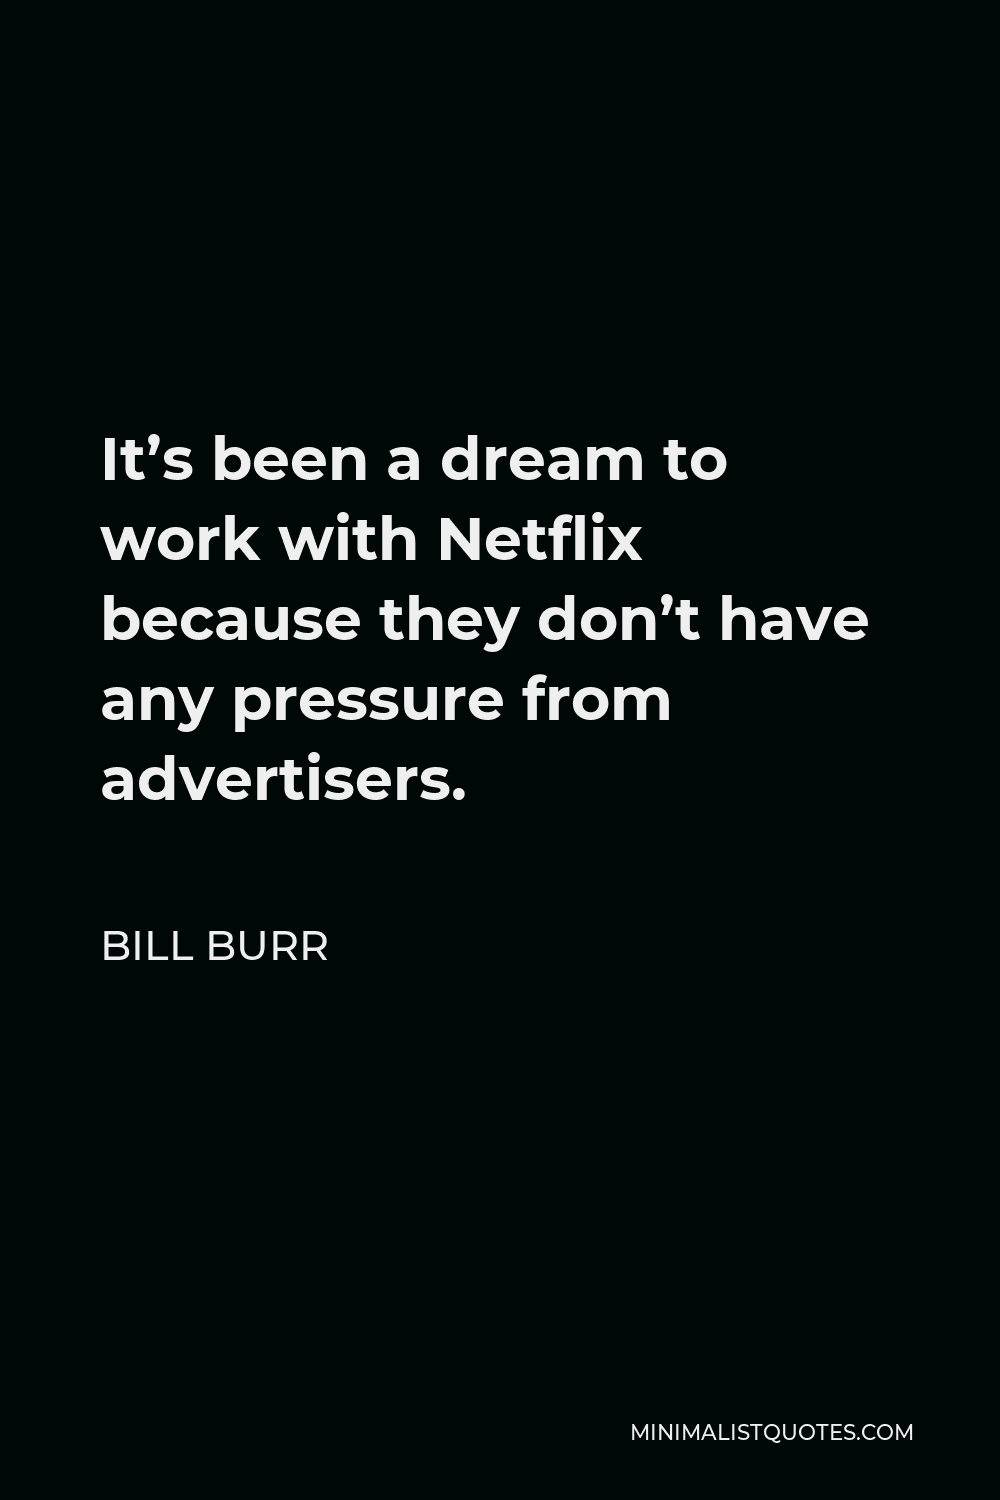 Bill Burr Quote - It’s been a dream to work with Netflix because they don’t have any pressure from advertisers.